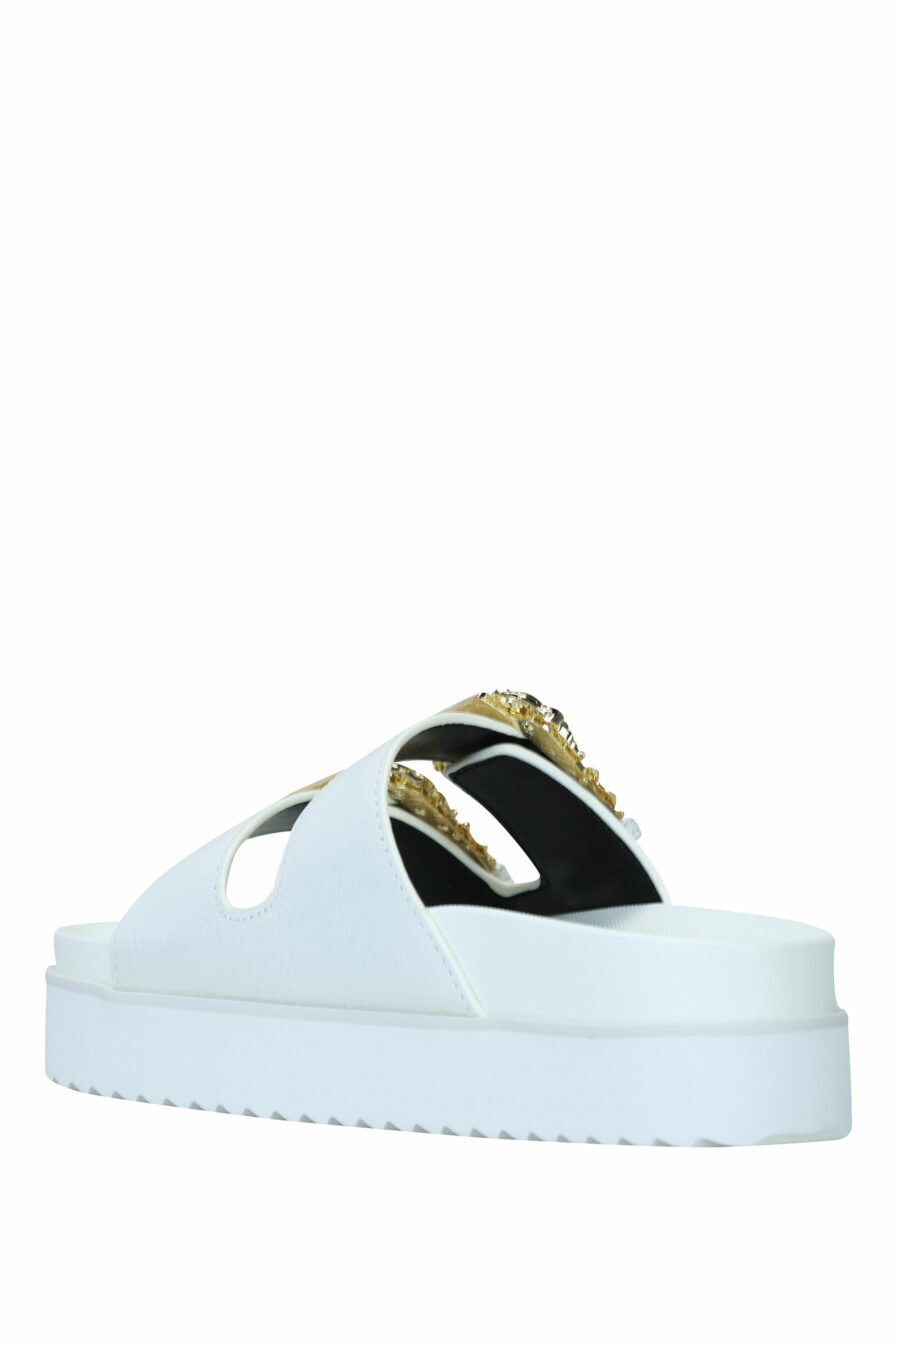 White sandals with gold baroque double buckle - 8052019607314 3